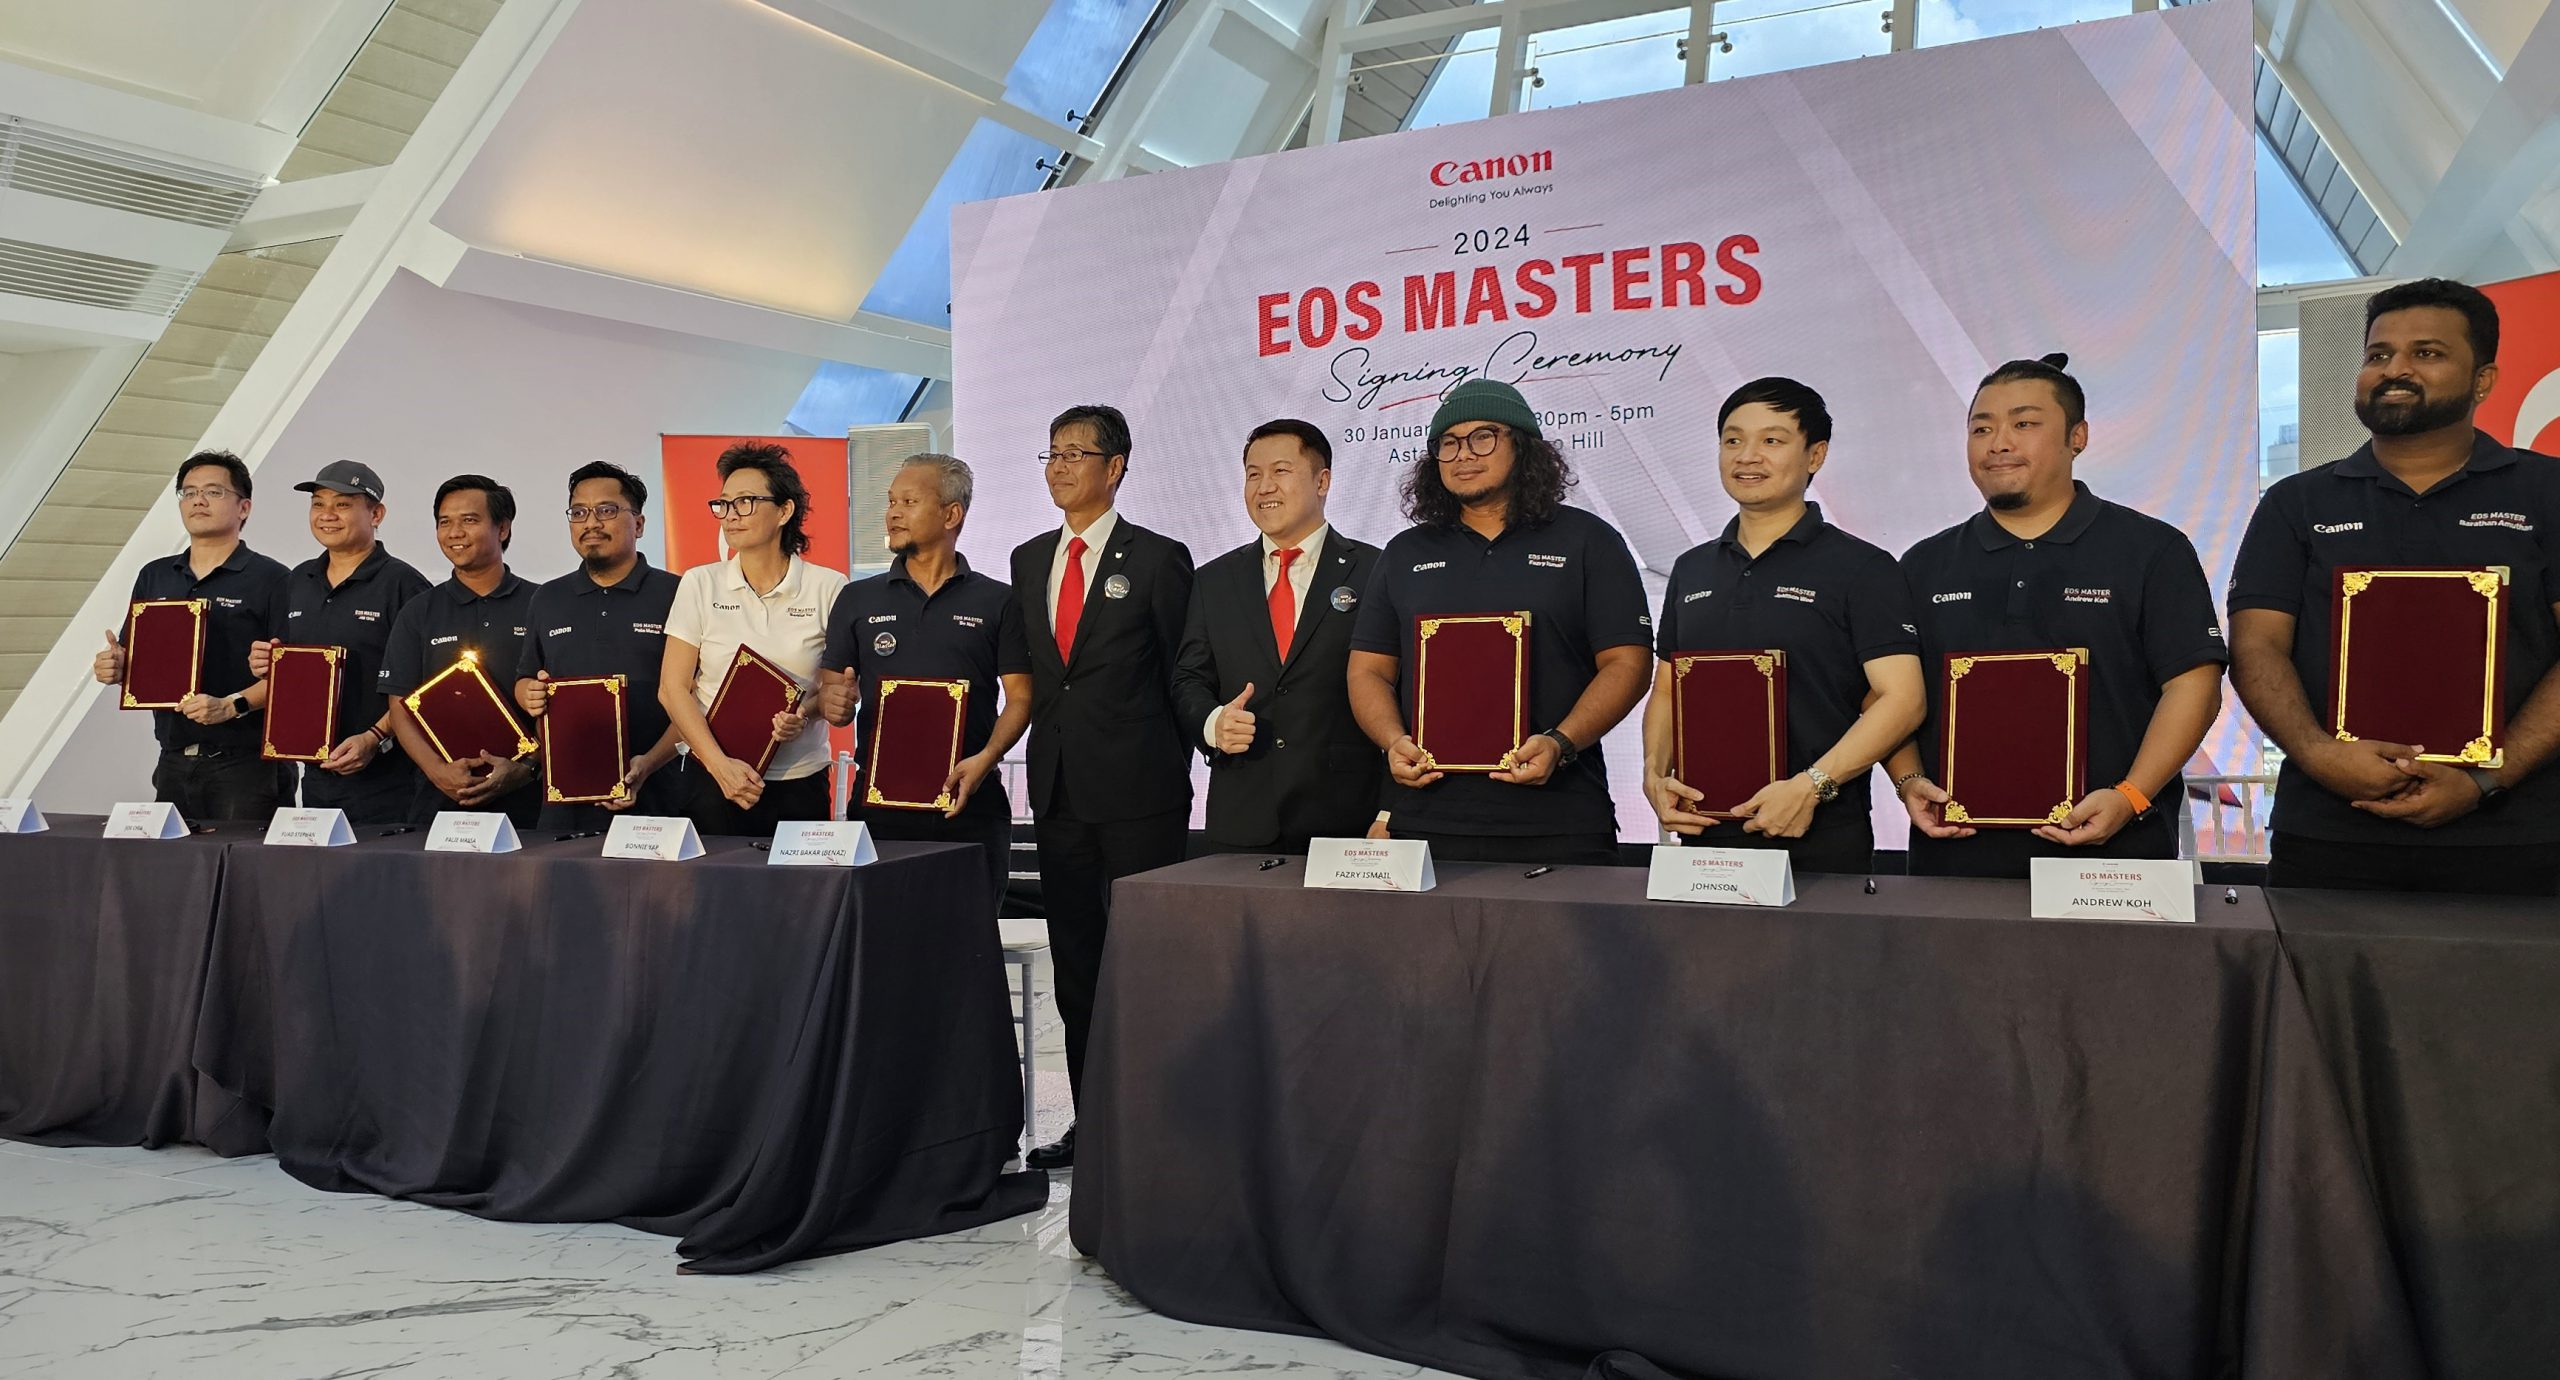 The Canon EOS Masters photographers, CEO of Canon Marketing Malaysia Masato Yoshiie and head of division Edward Chang